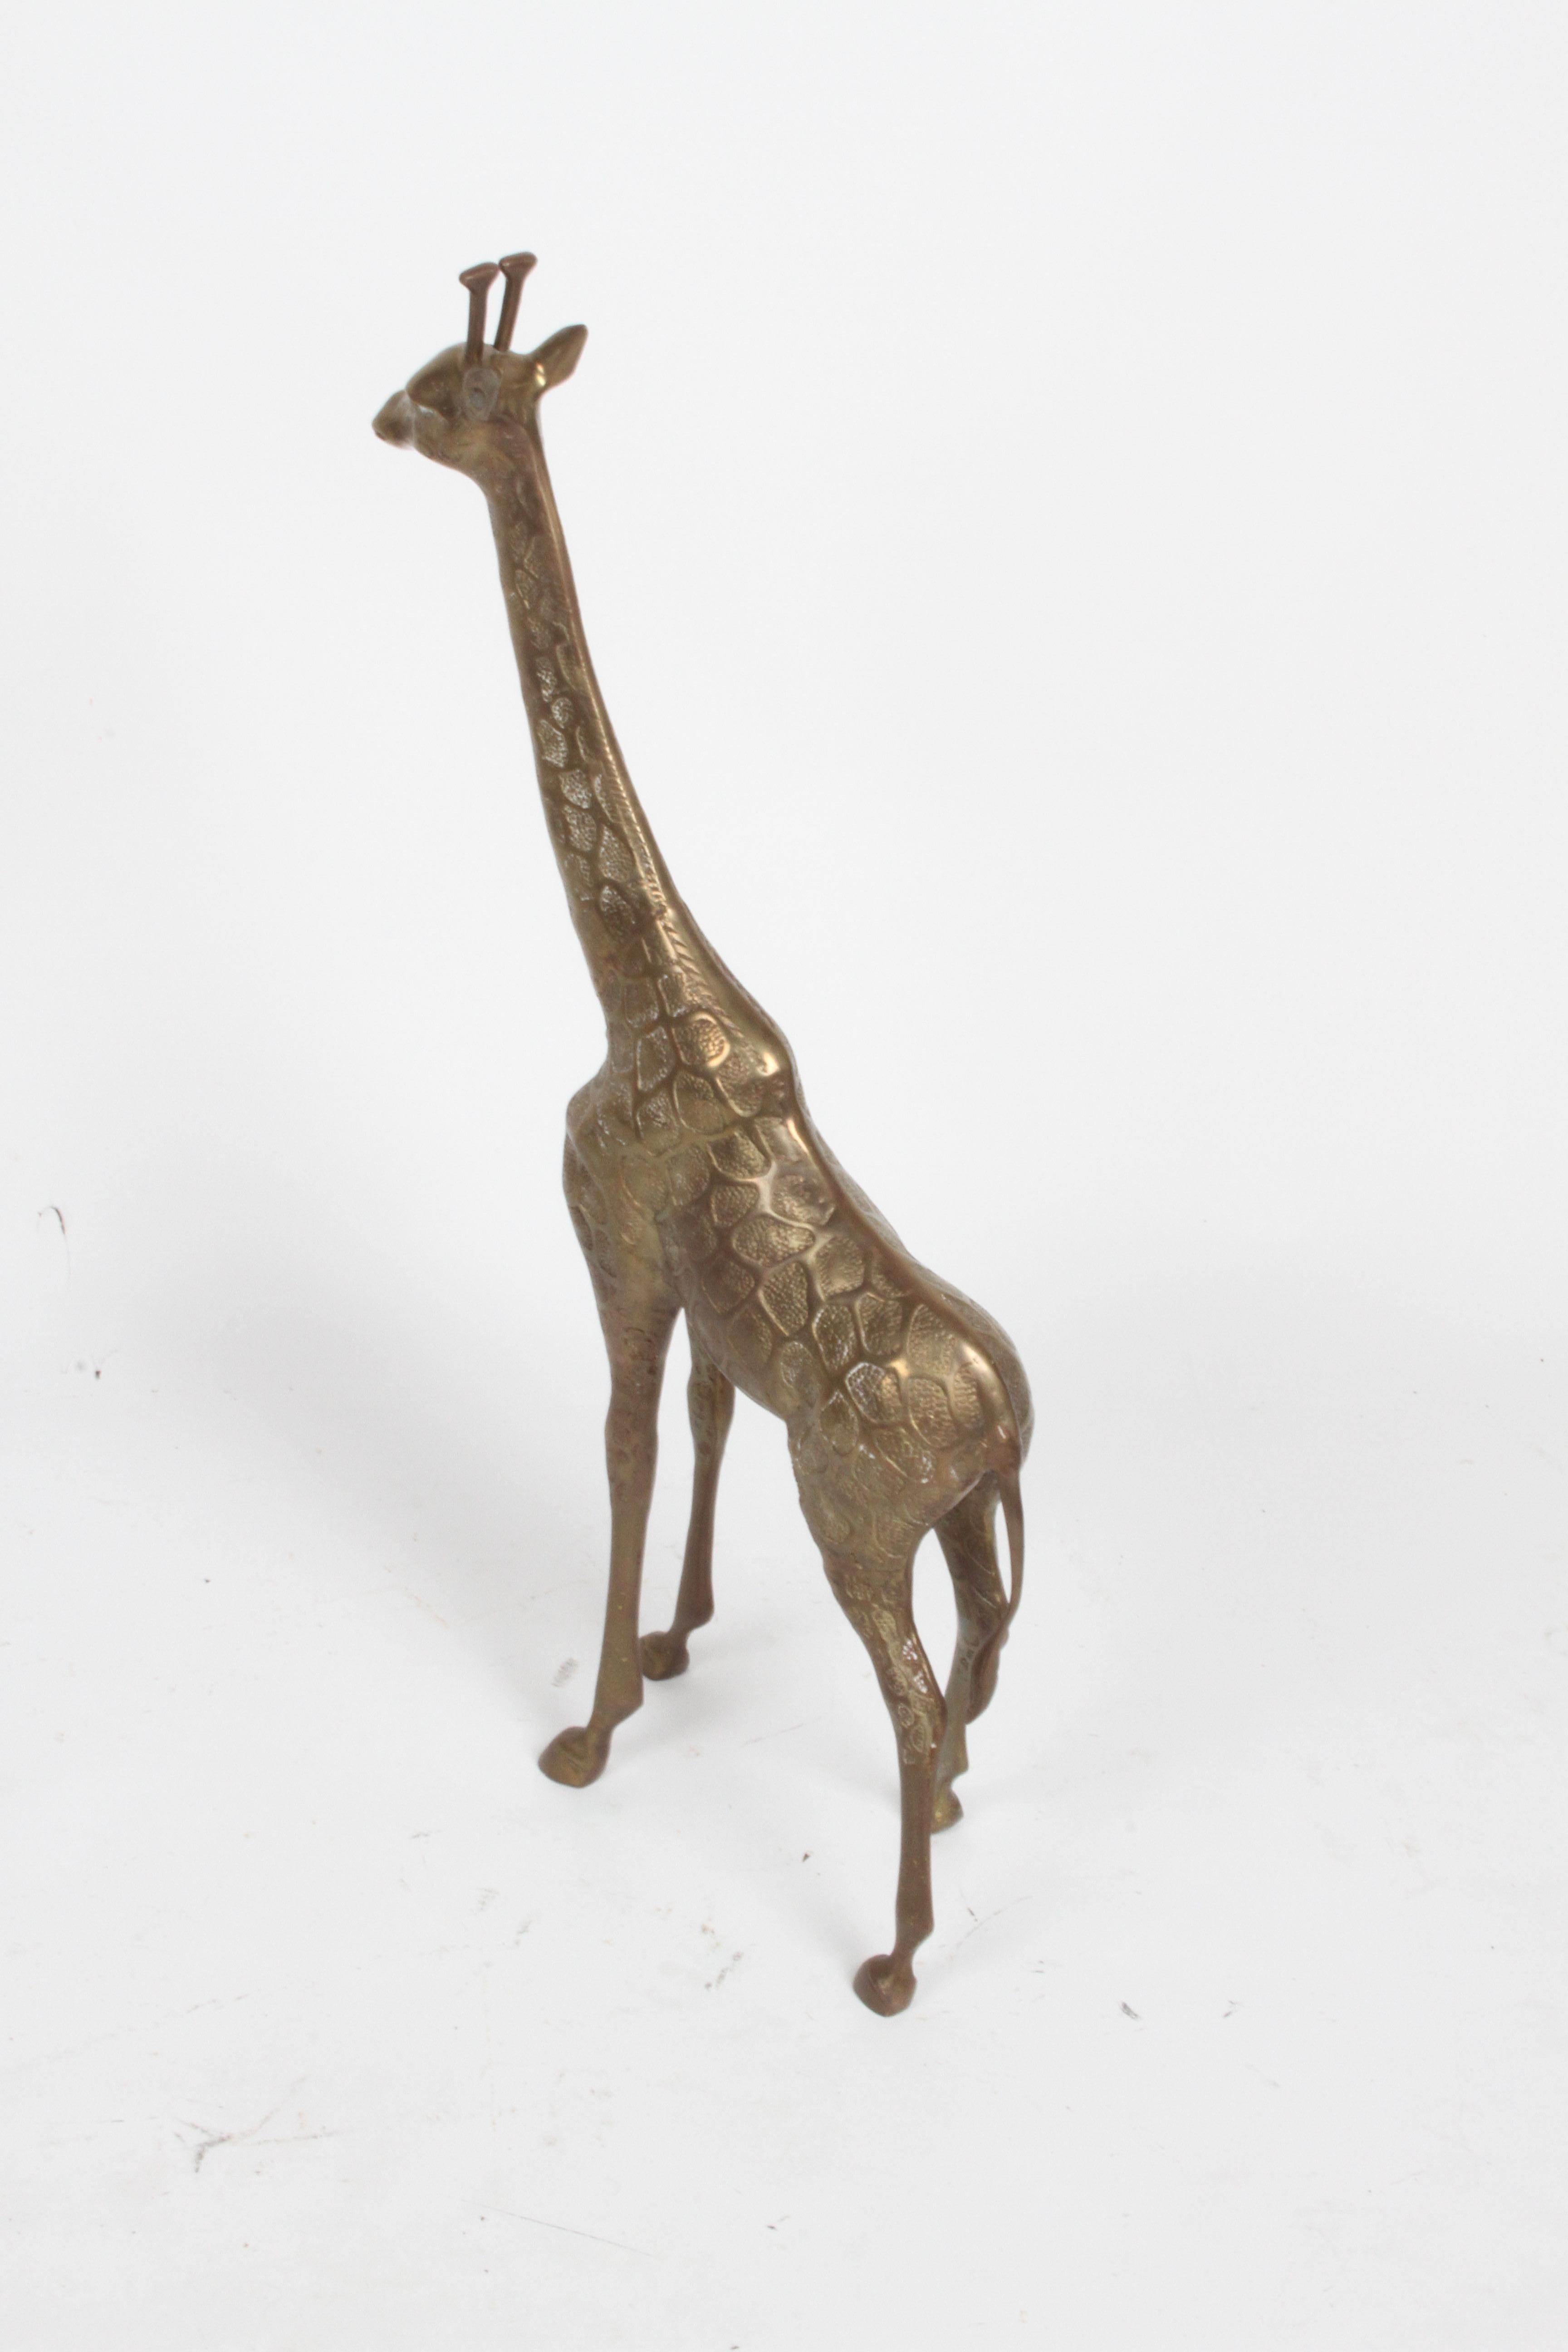 Hollywood Regency Style Brass Giraffe Floor Statue or Sculpture, circa 1970s In Good Condition For Sale In St. Louis, MO